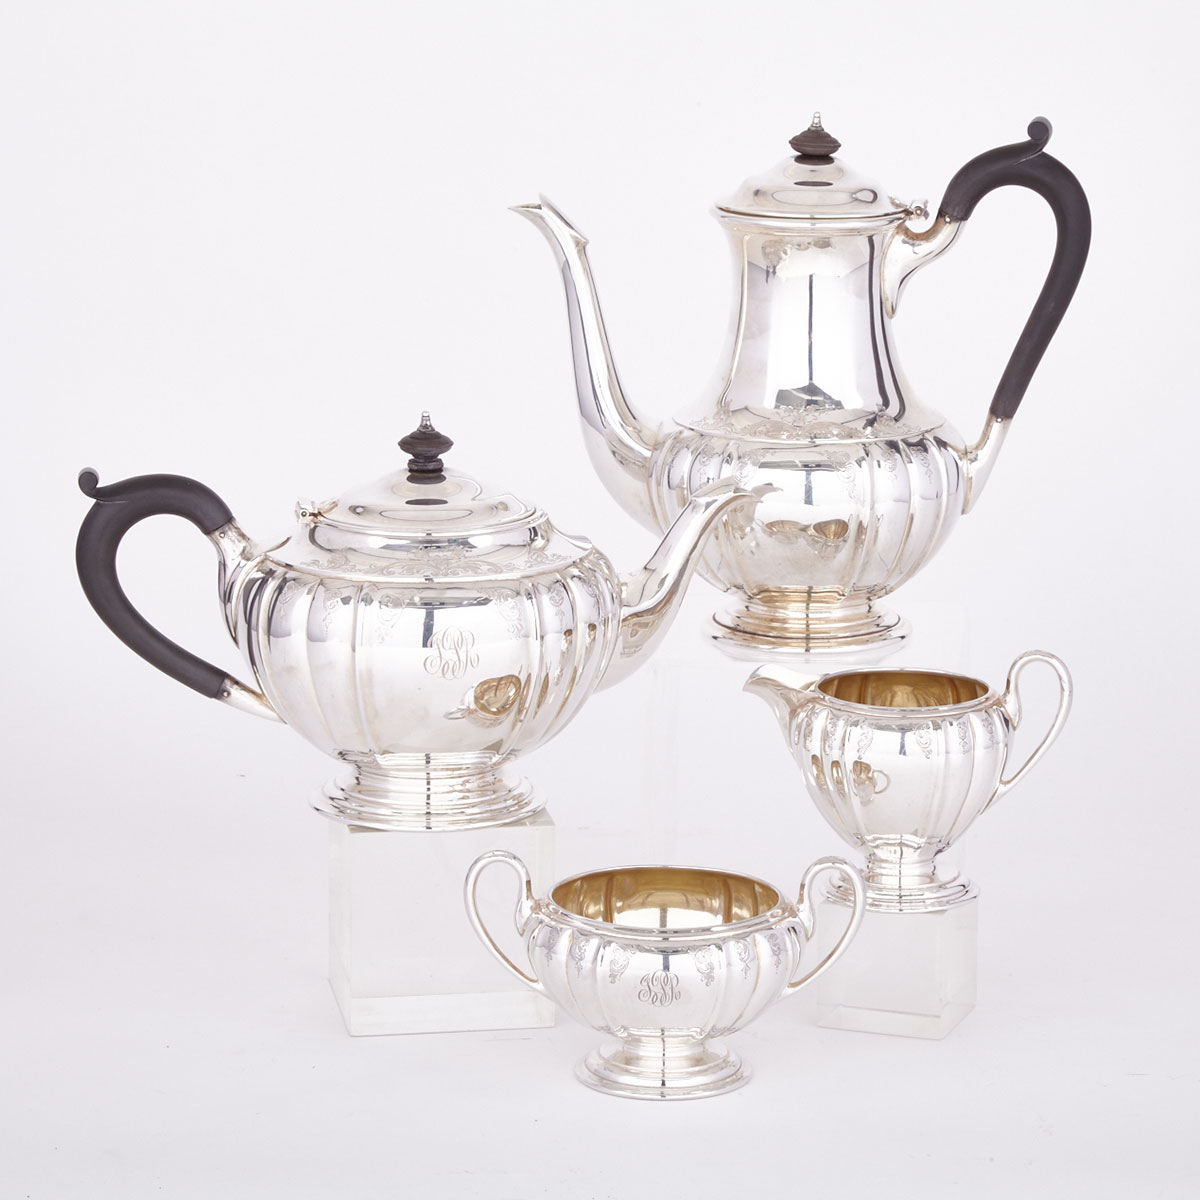 Canadian Silver Tea and Coffee Service, Henry Birks & Sons, Montreal, Que., 1936/38